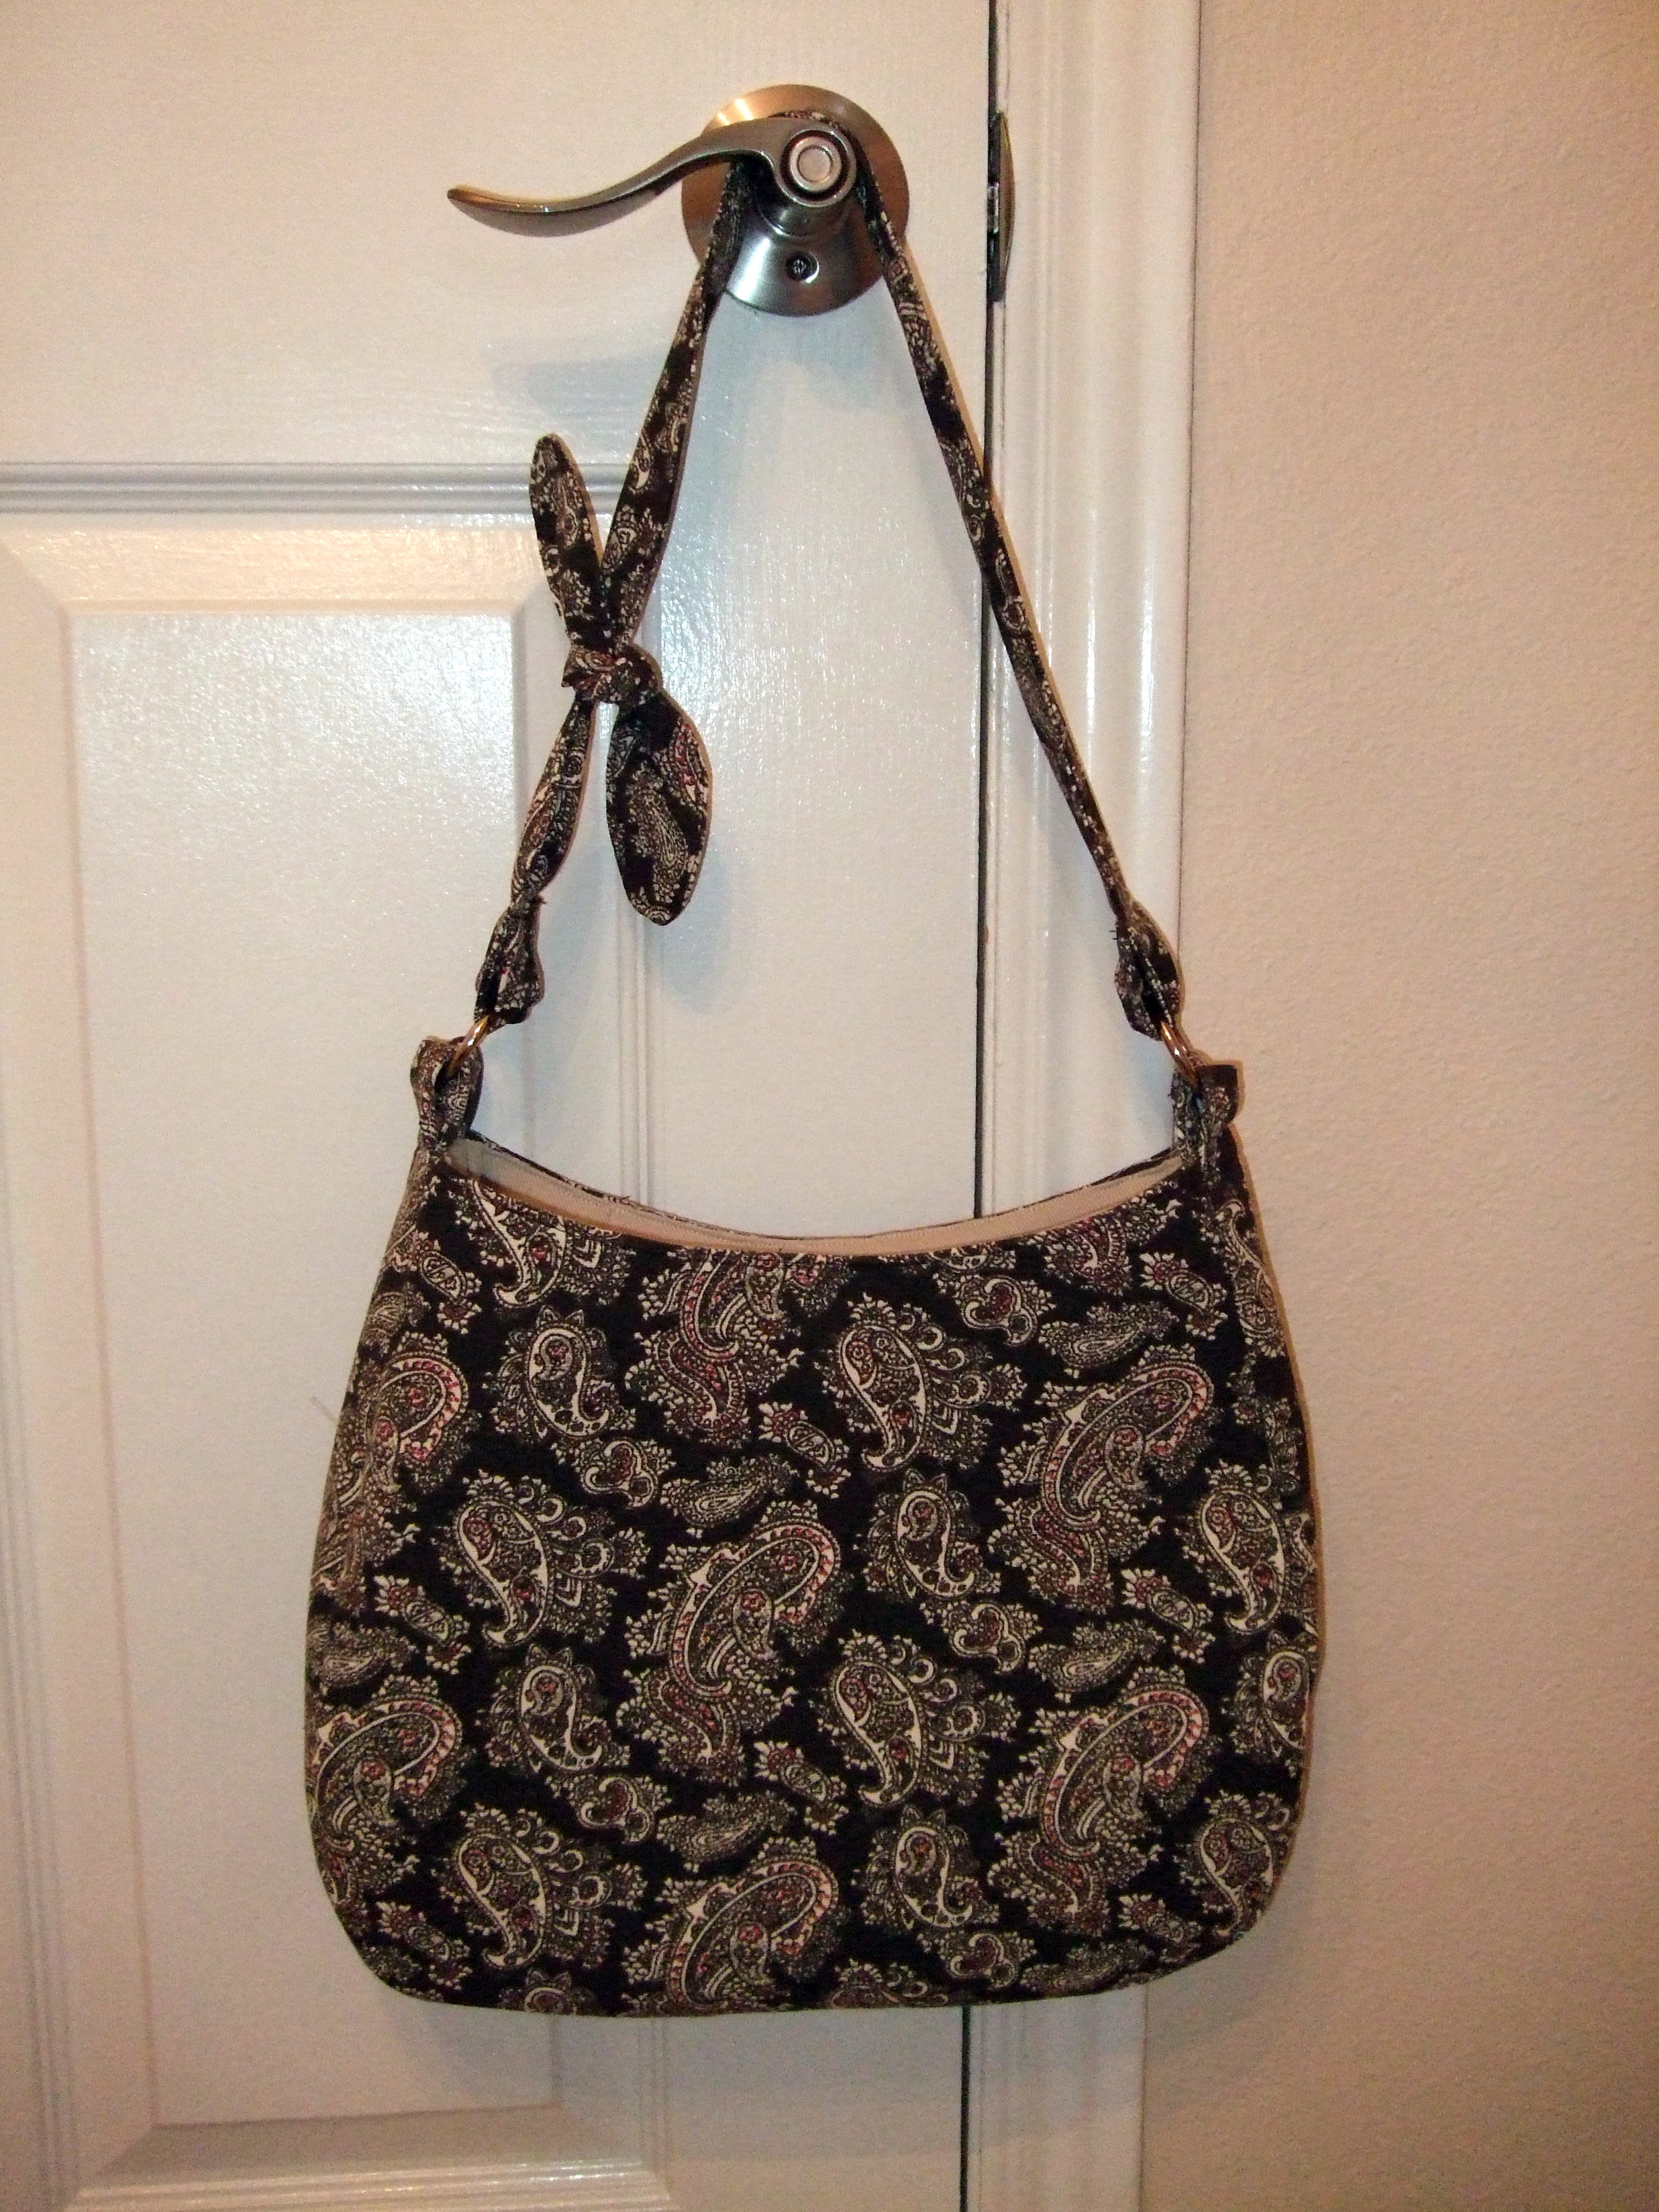 Hobo bags - we 💛 this style! Find free patterns here.